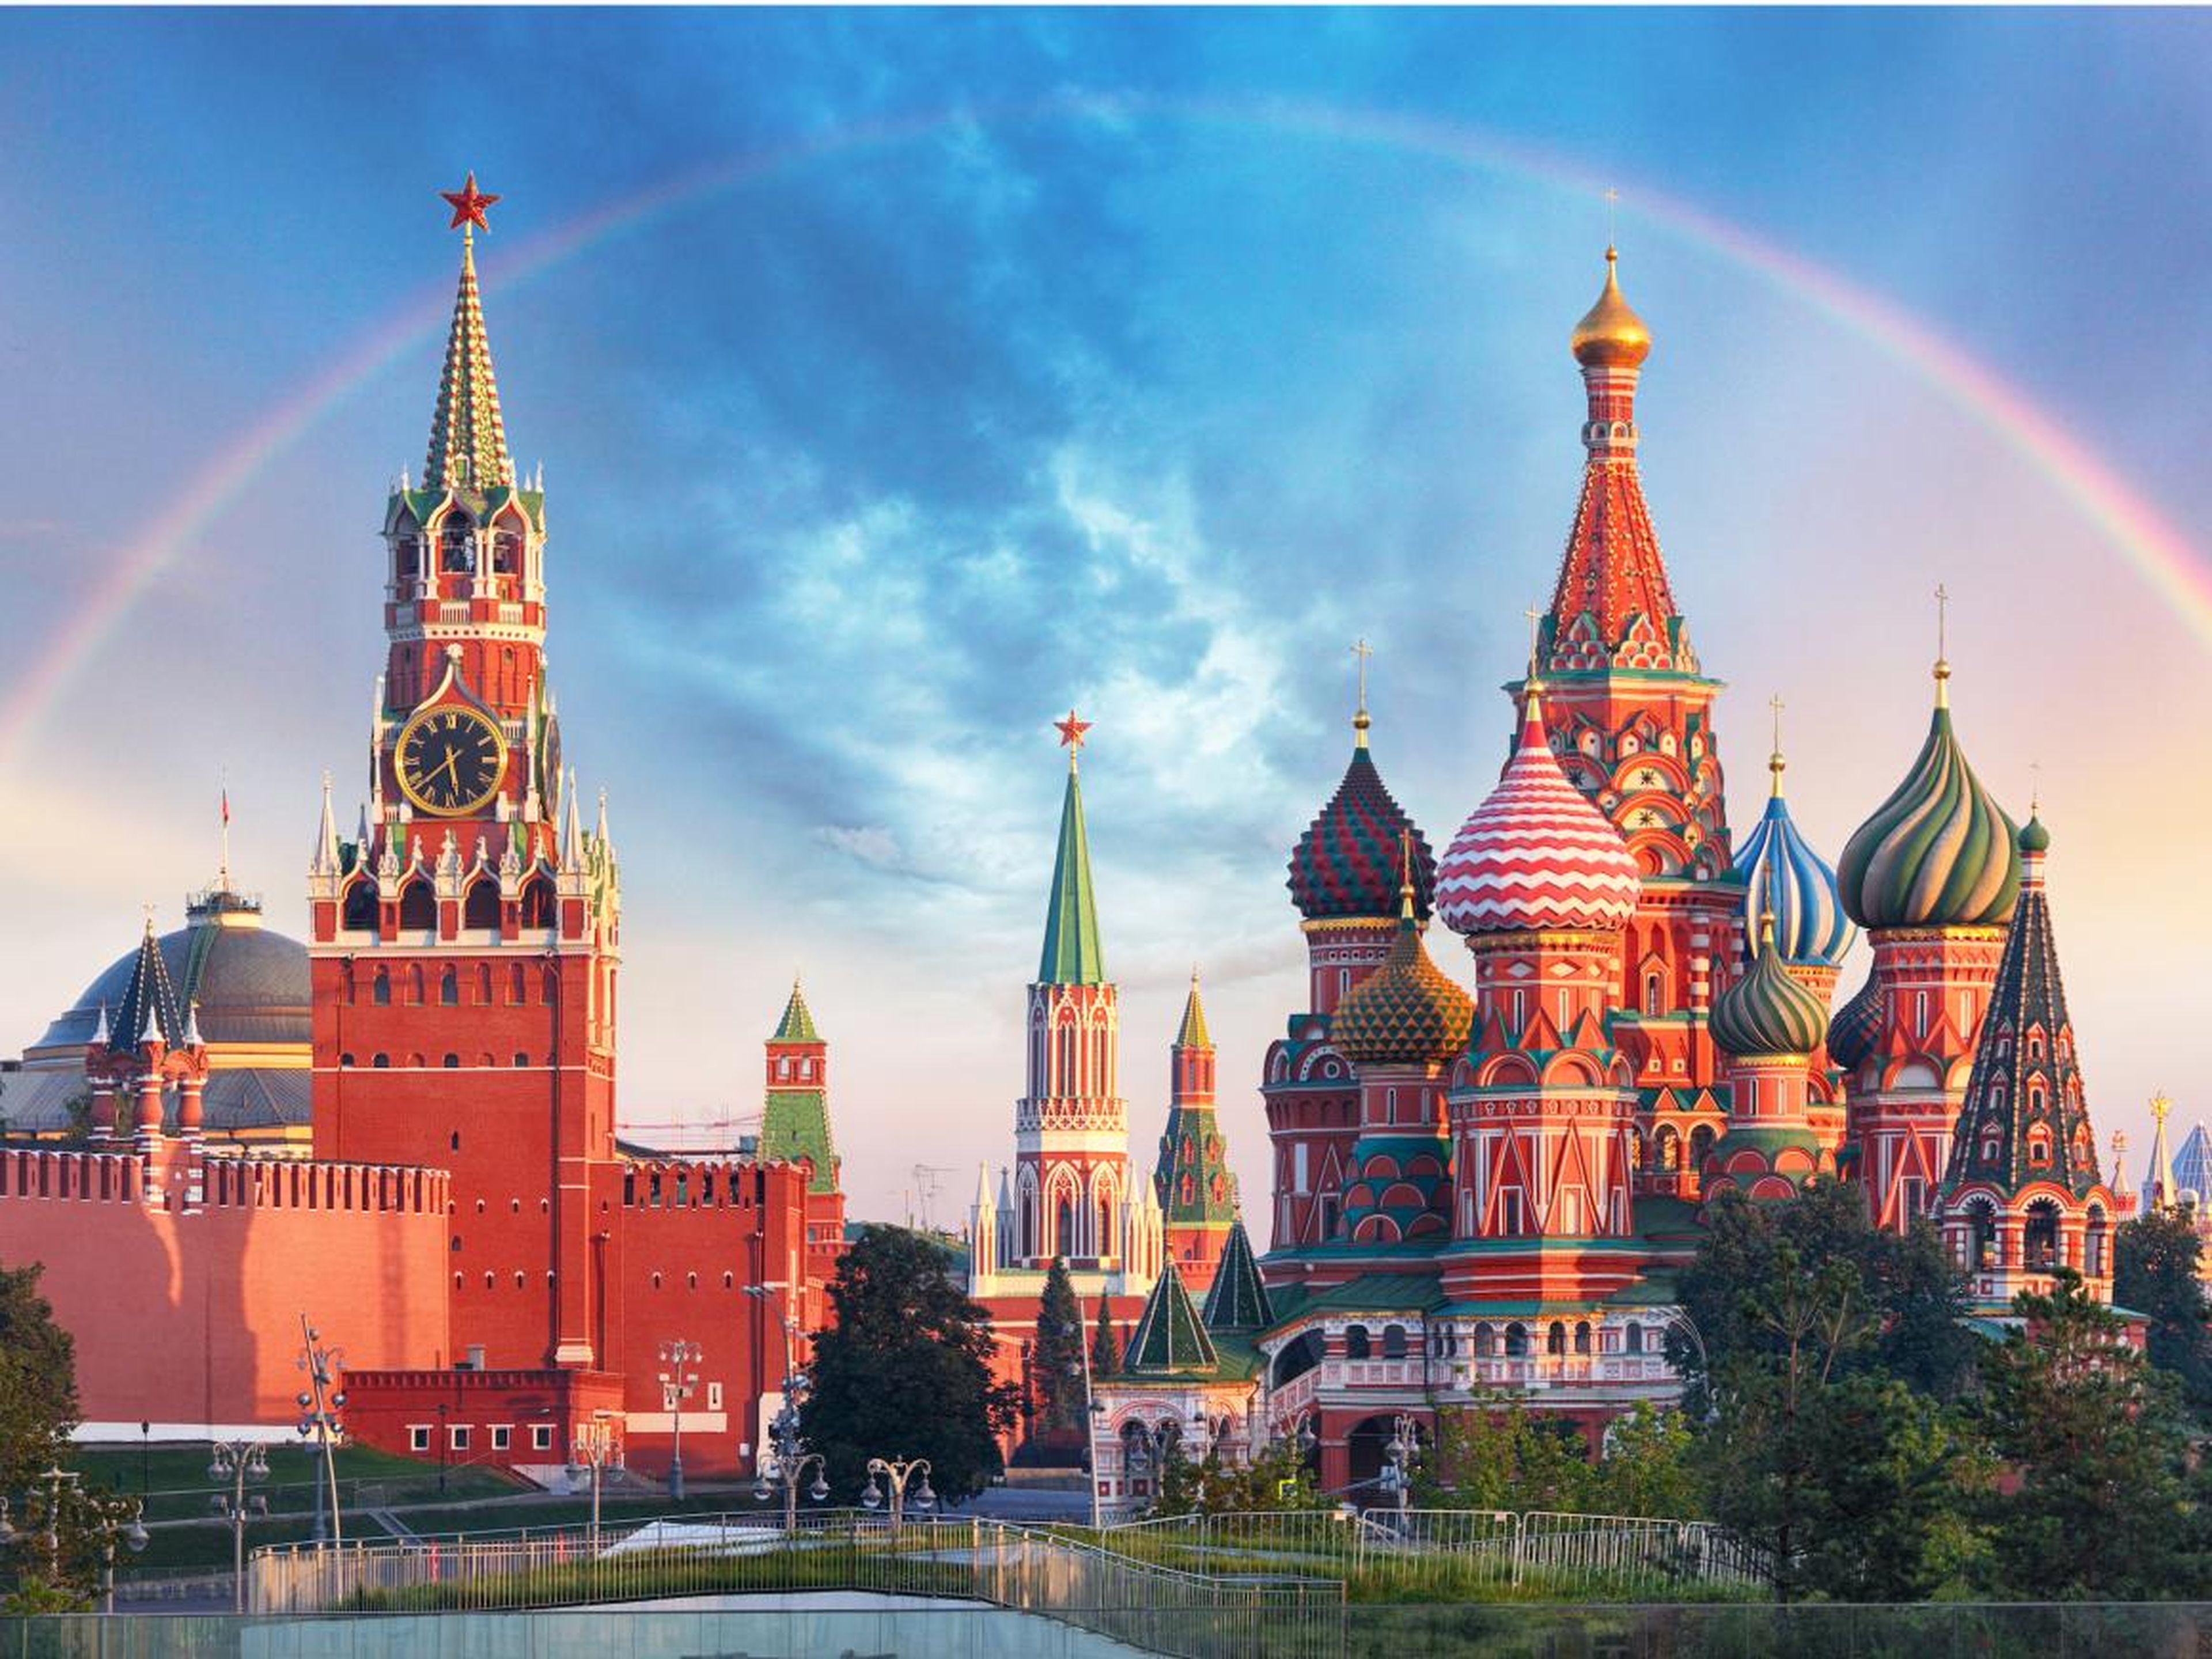 2. Moscow is the capital of Russia and the country's financial and cultural center.